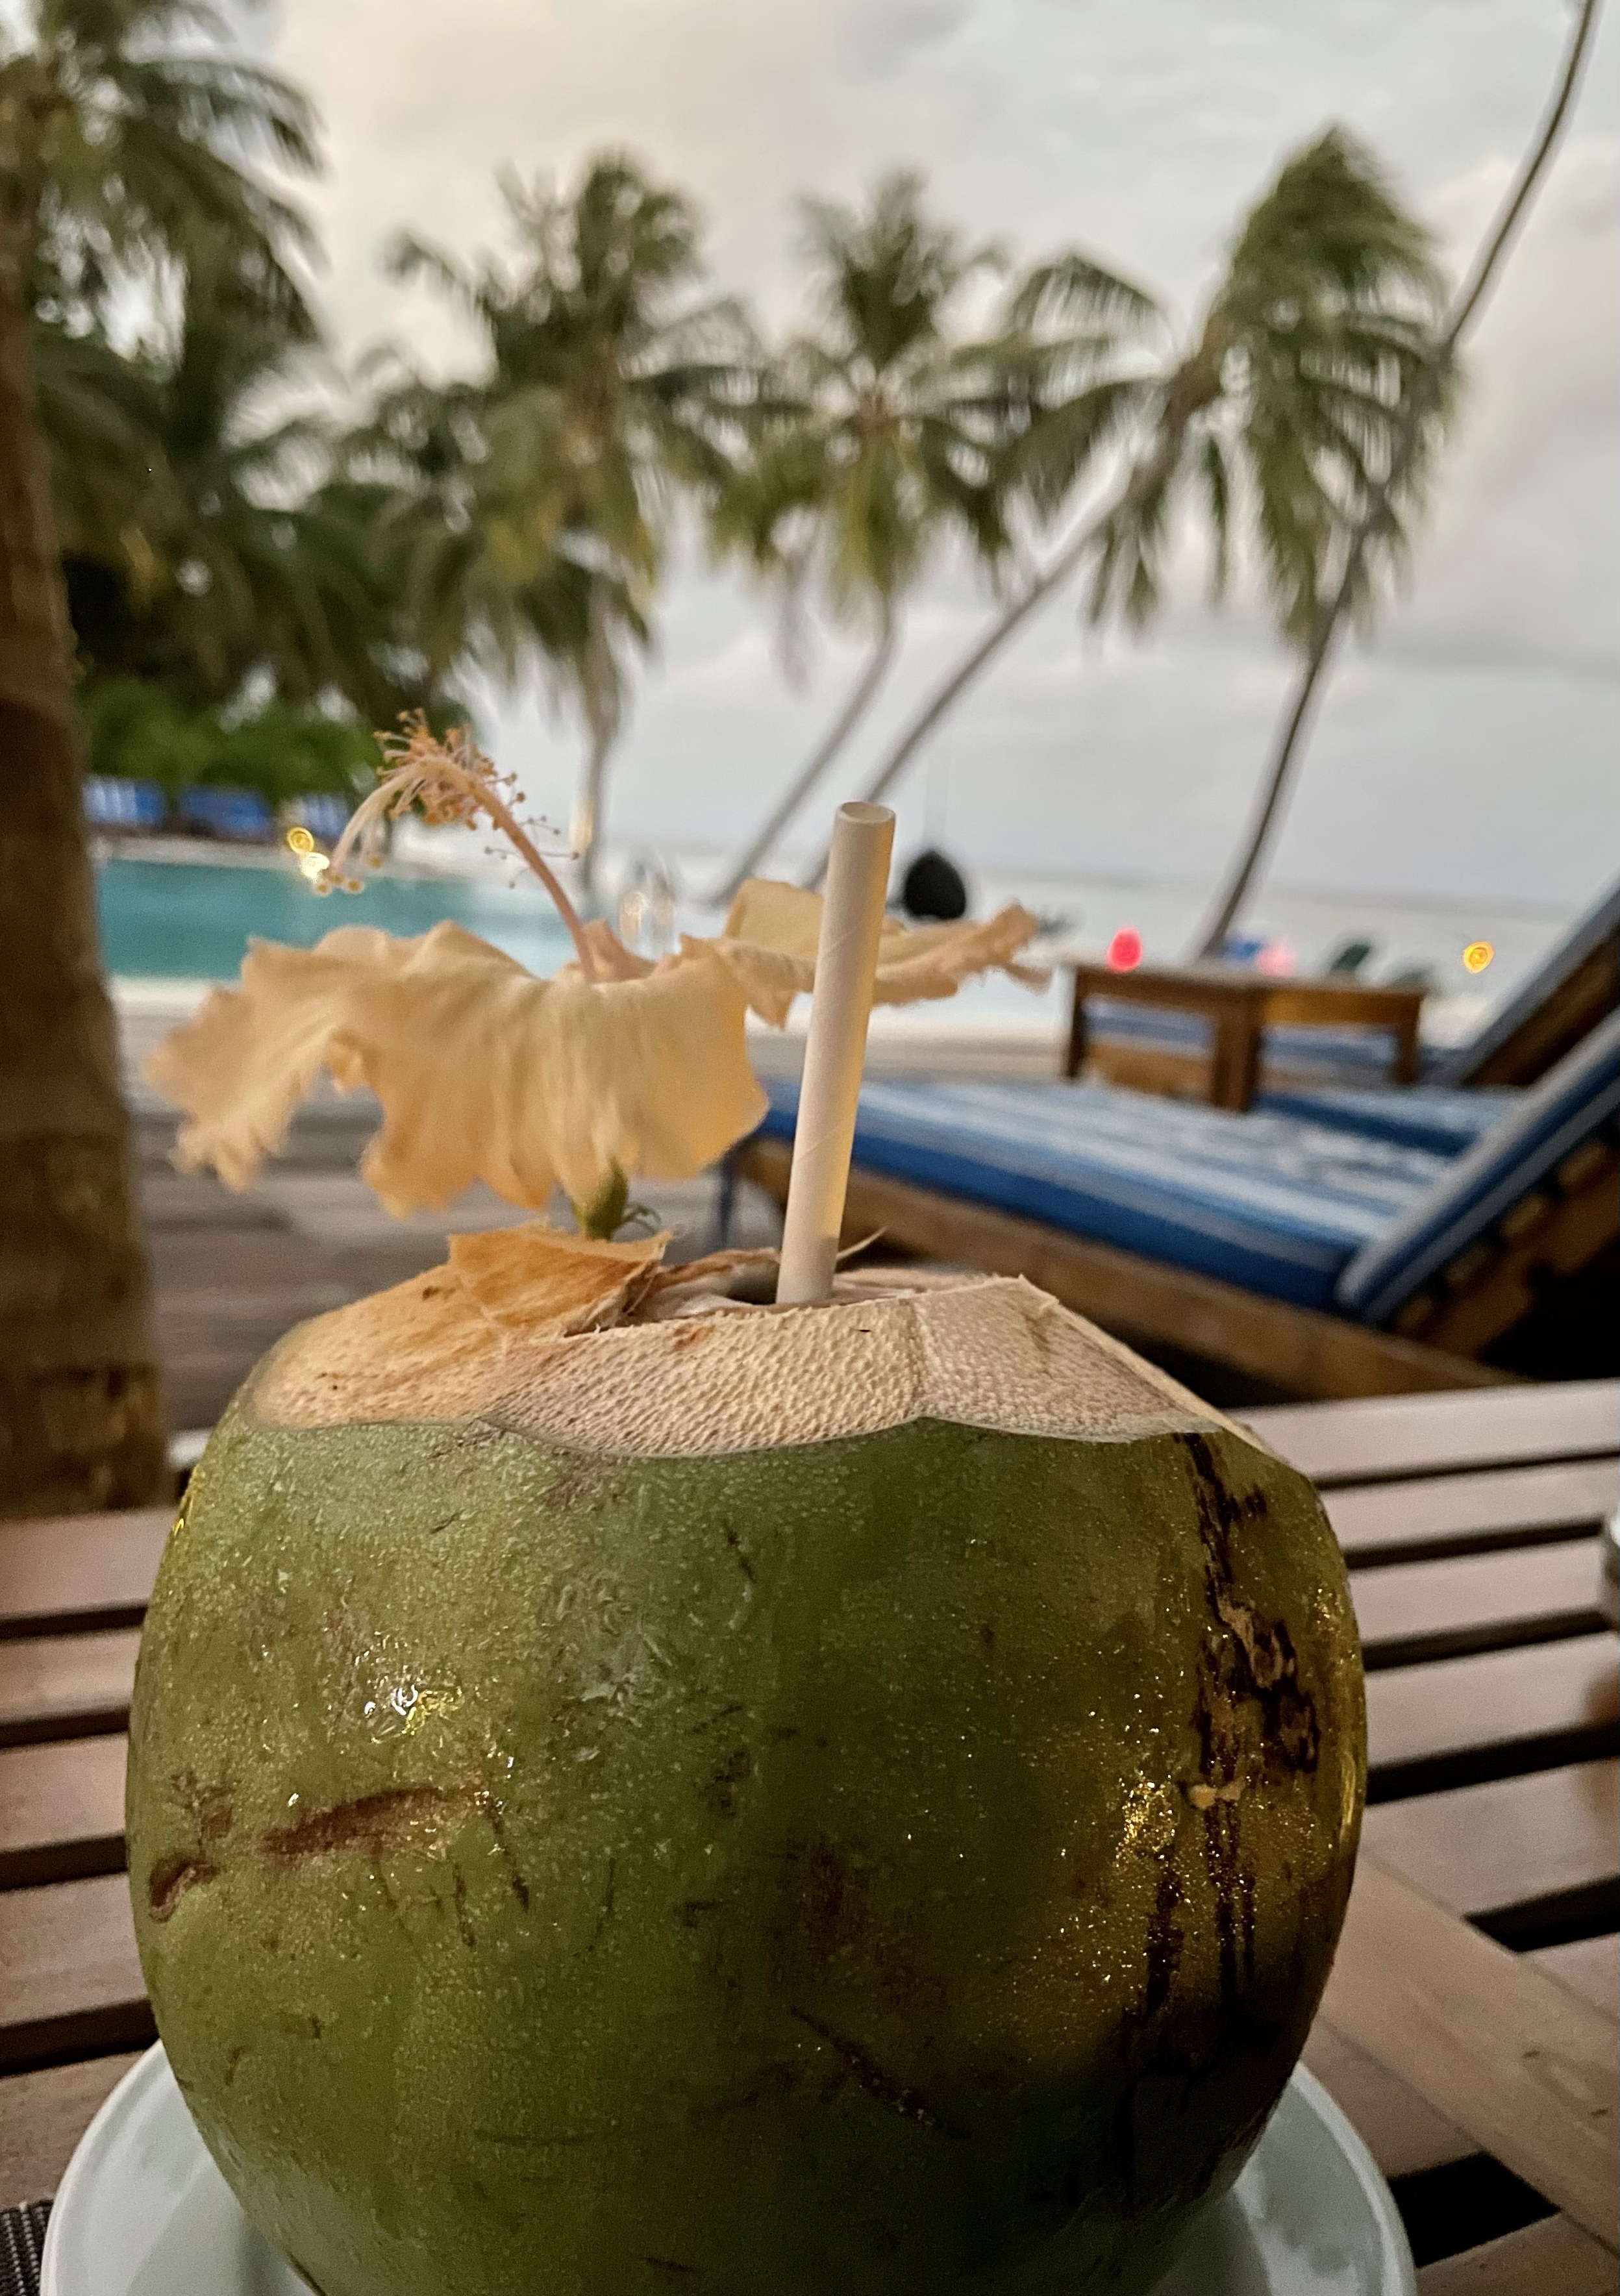 The 7 benefits of coconut water according to the Maldivian experts